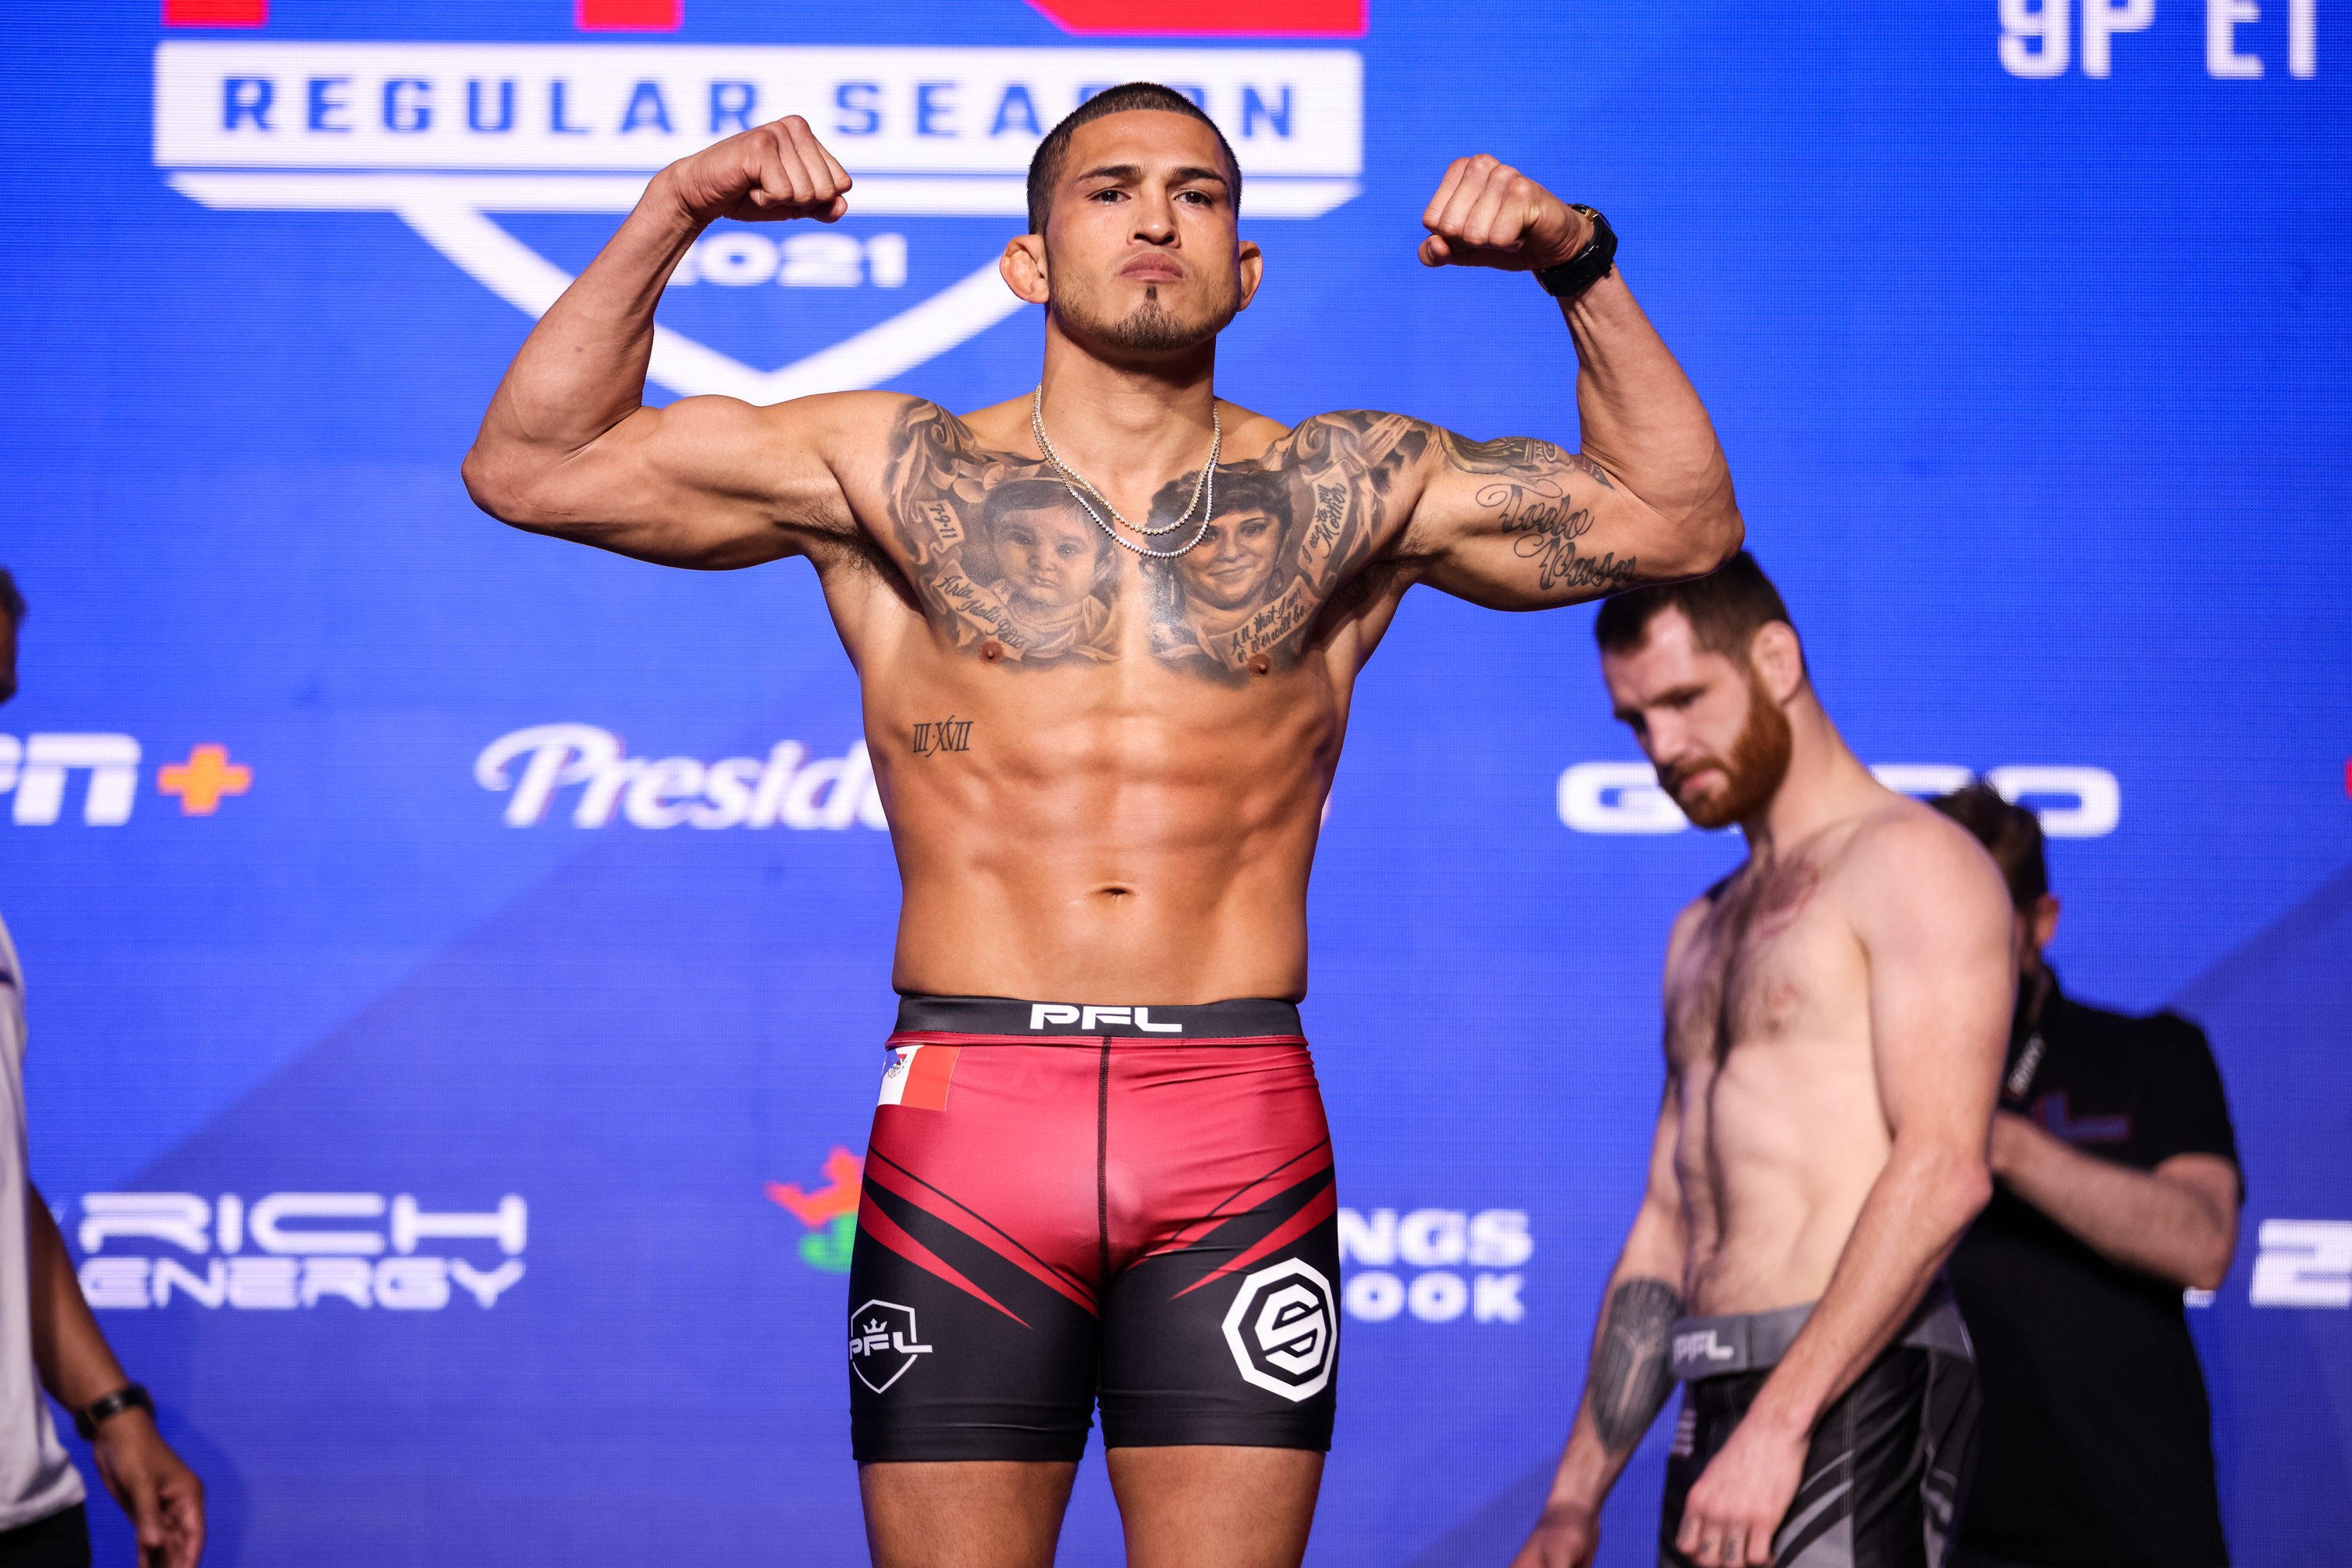 Anthony Pettis poses on the scale at the PFL weigh-ins. Photos: PFL